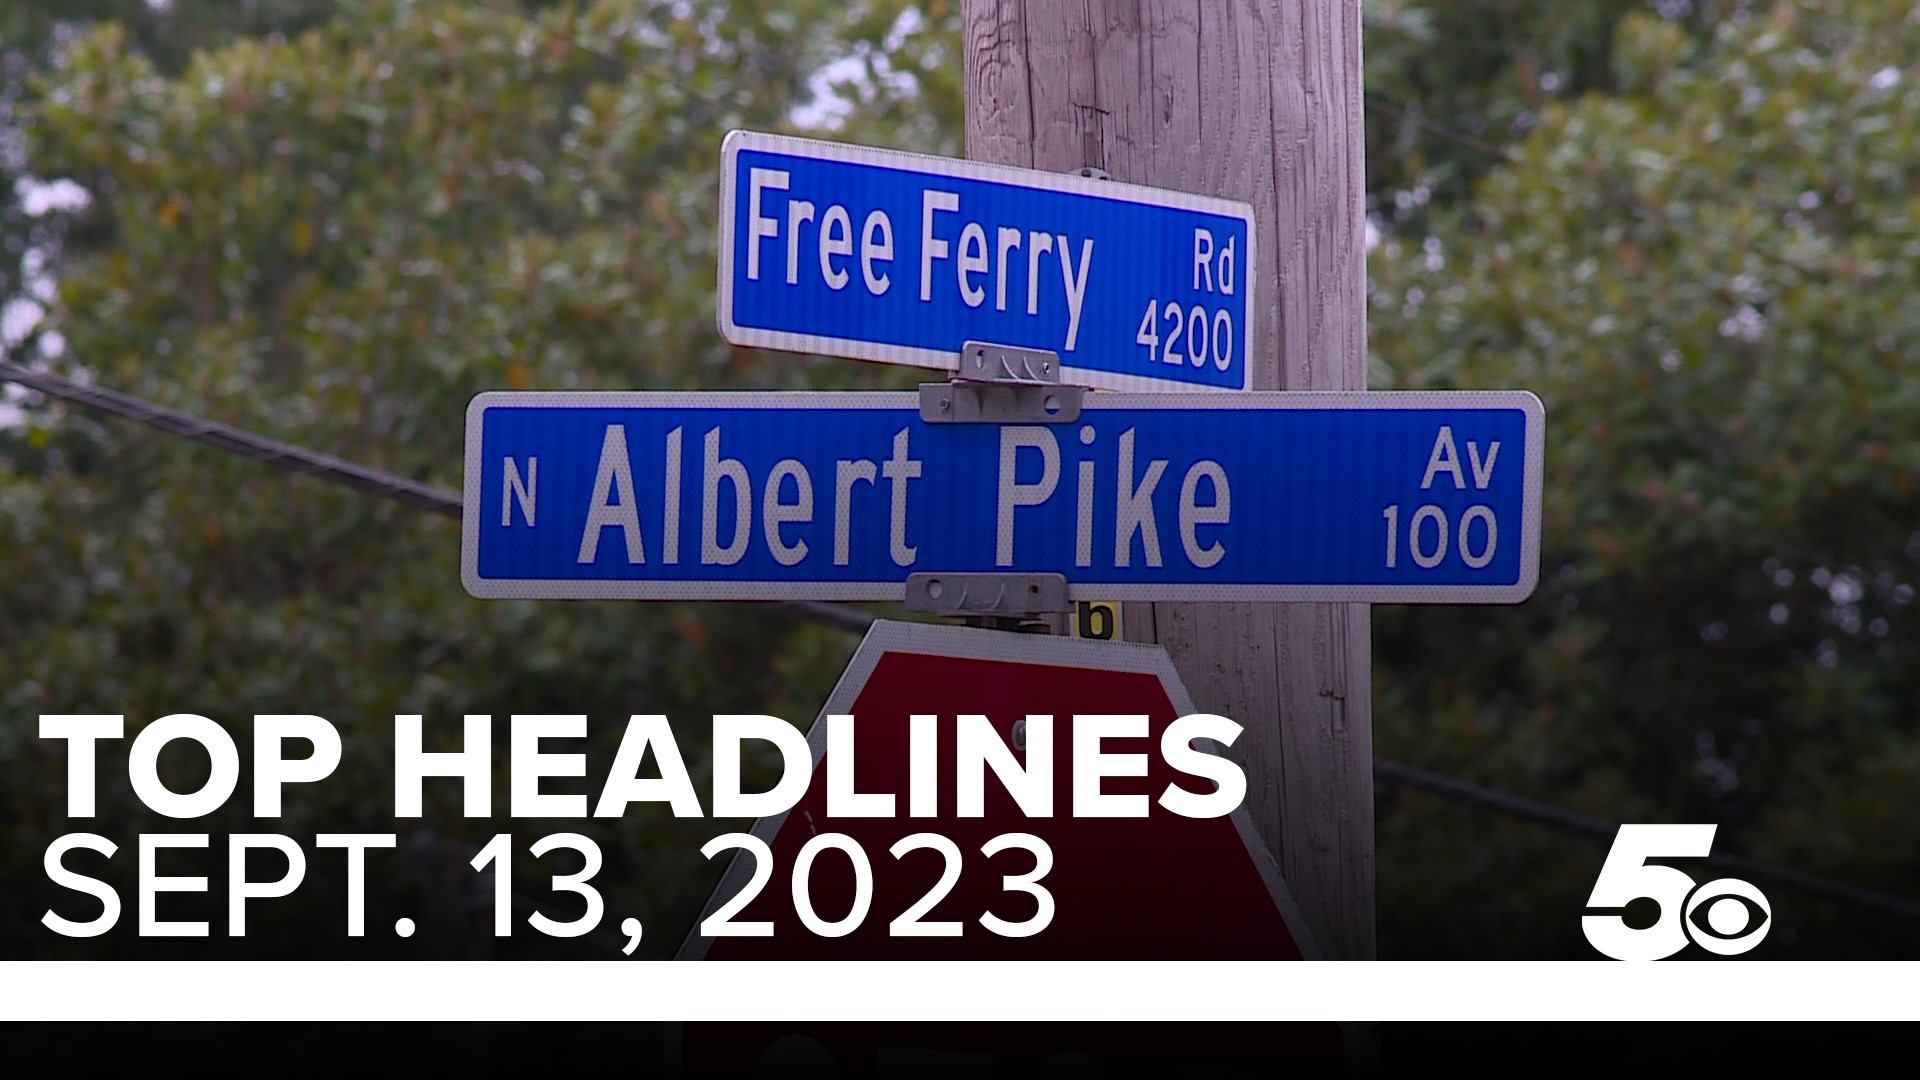 Top headlines for Northwest Arkansas and the River Valley for September 13, 2023.